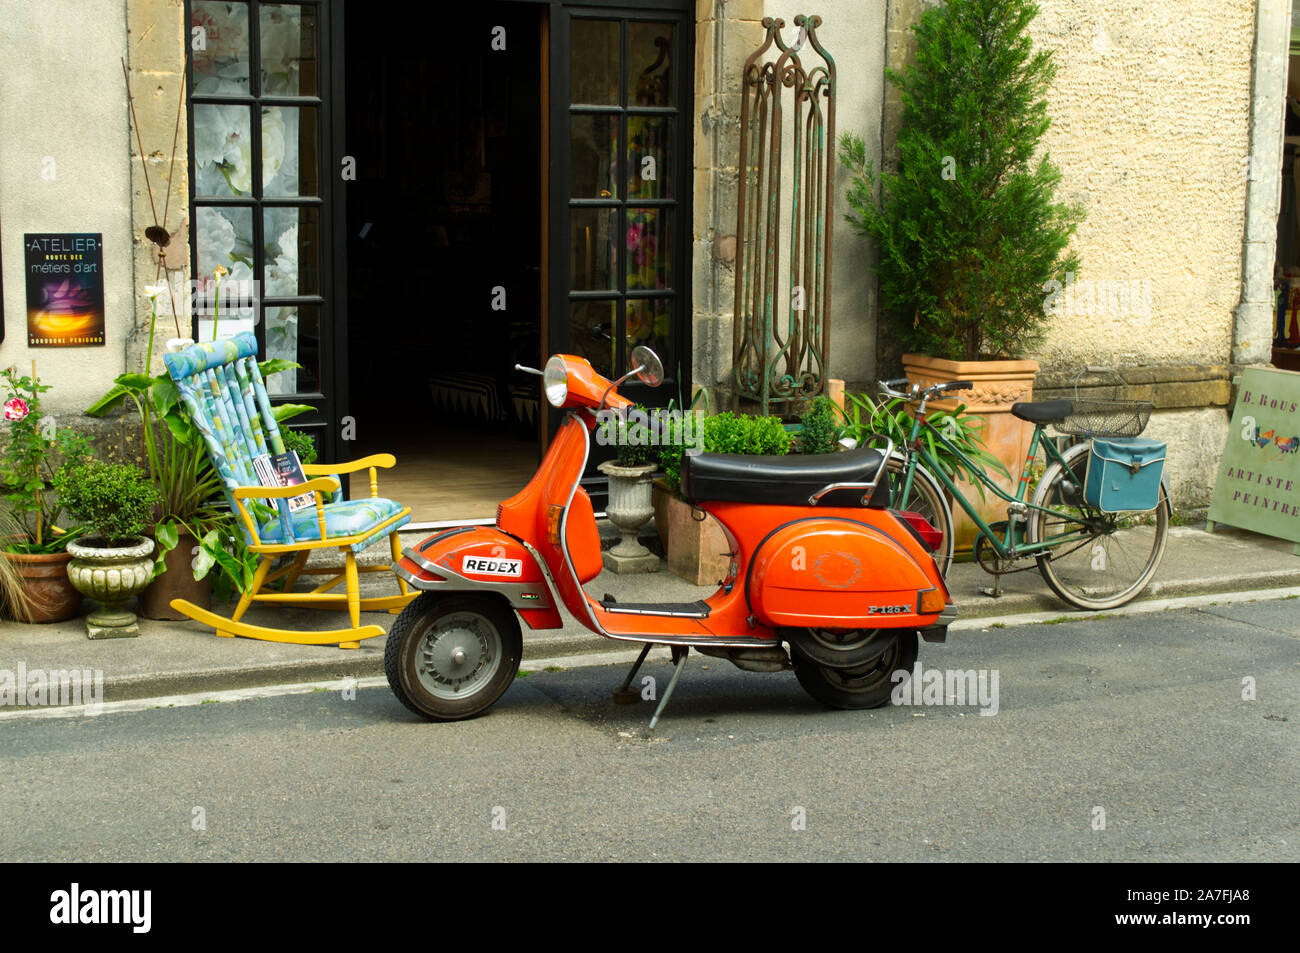 Orange scooter parked outside shop in Monpazier, France with old bicycle and chair Stock Photo